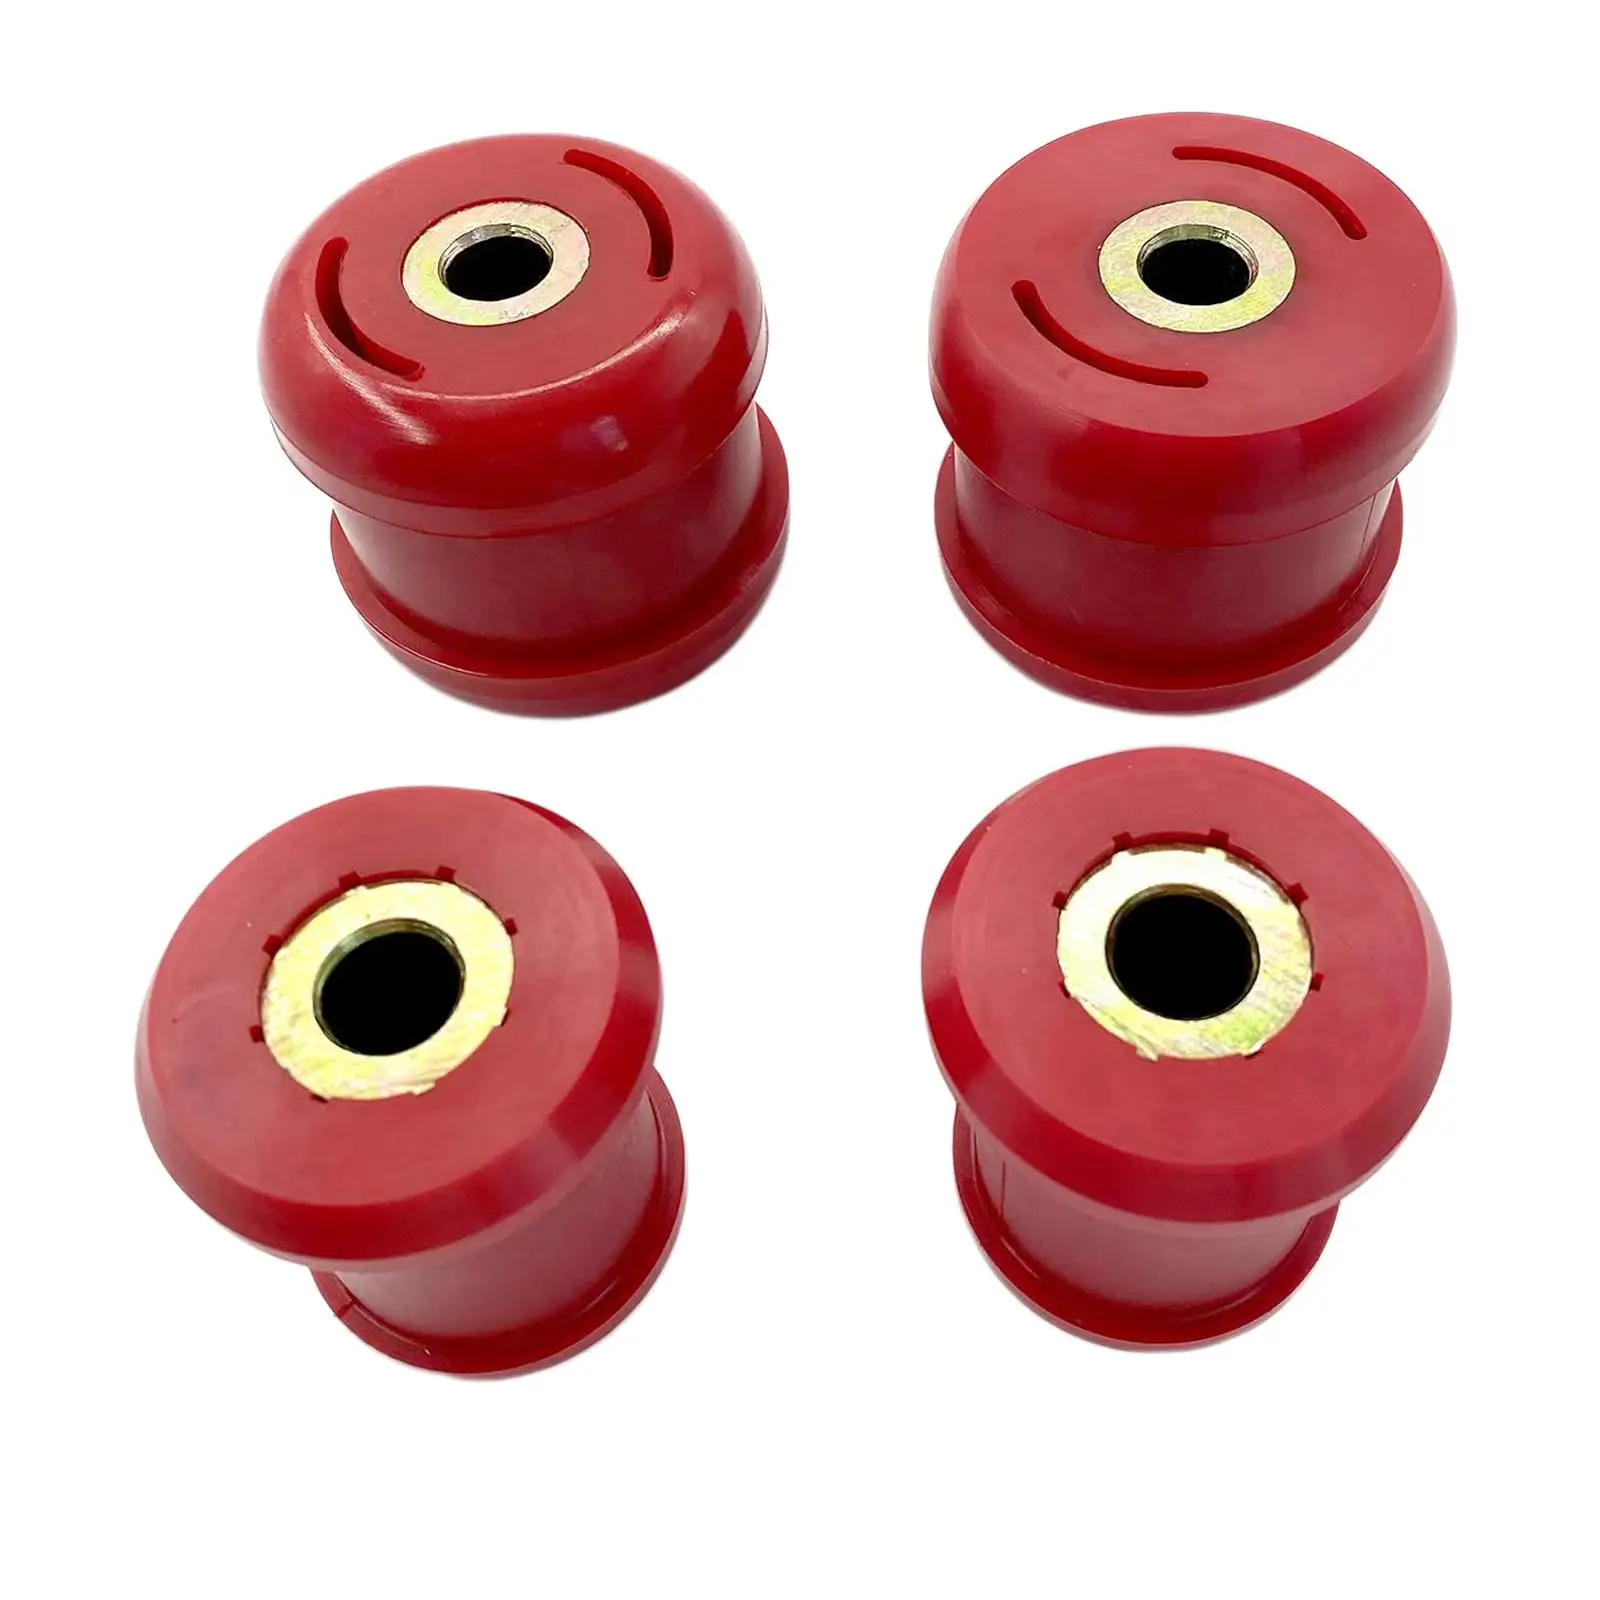 4x Front Lower Control Arm Bushing performance Car Accessories Replacement Bbj-Hd1-402F-Rd-839-D0 8-215 for RSX